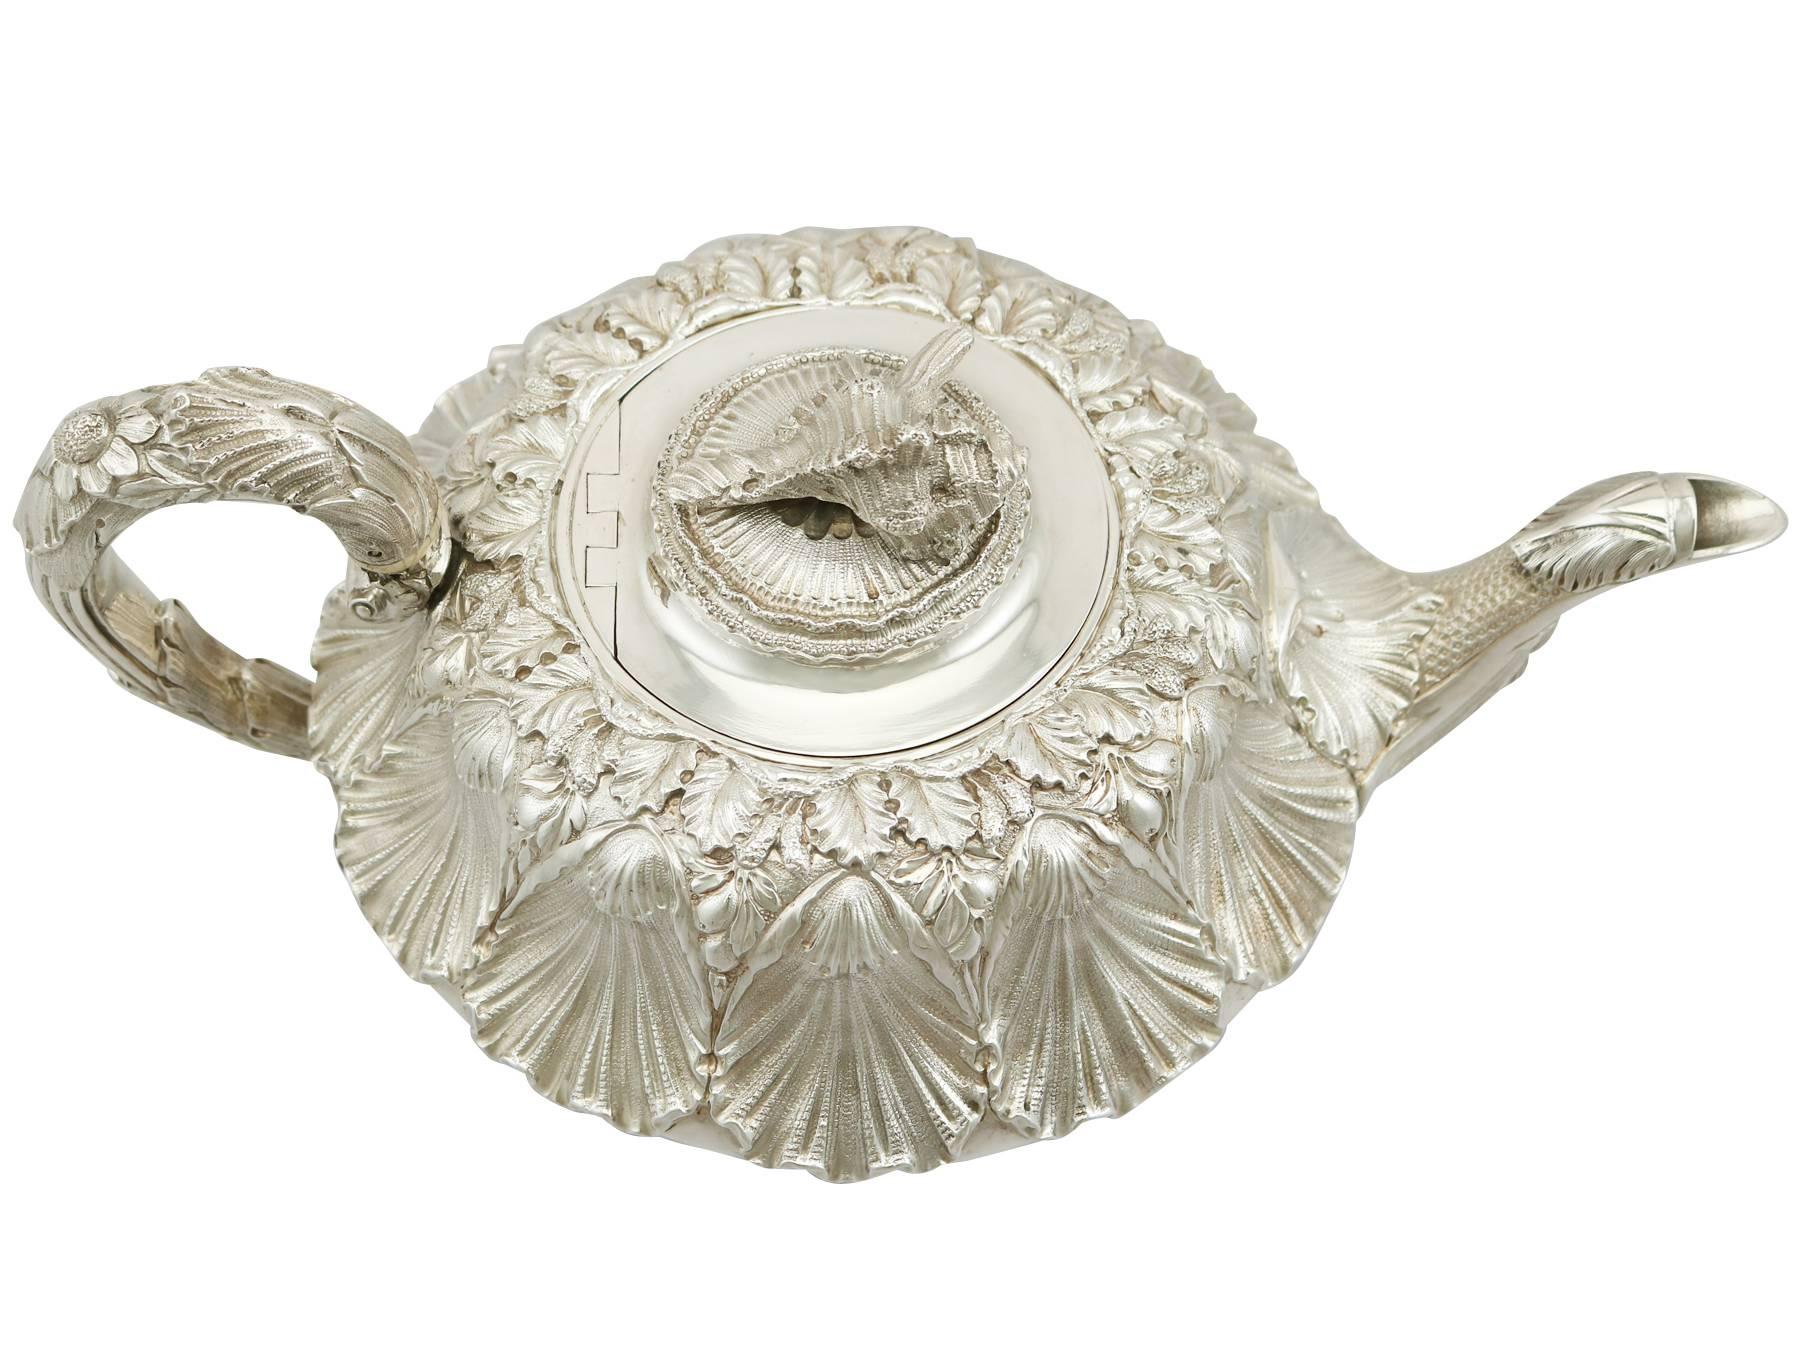 A magnificent, fine and impressive antique George IV English sterling silver teapot made by Charles Thomas Fox; an addition to our silver teaware collection.
This magnificent antique George IV English sterling silver teapot has a circular